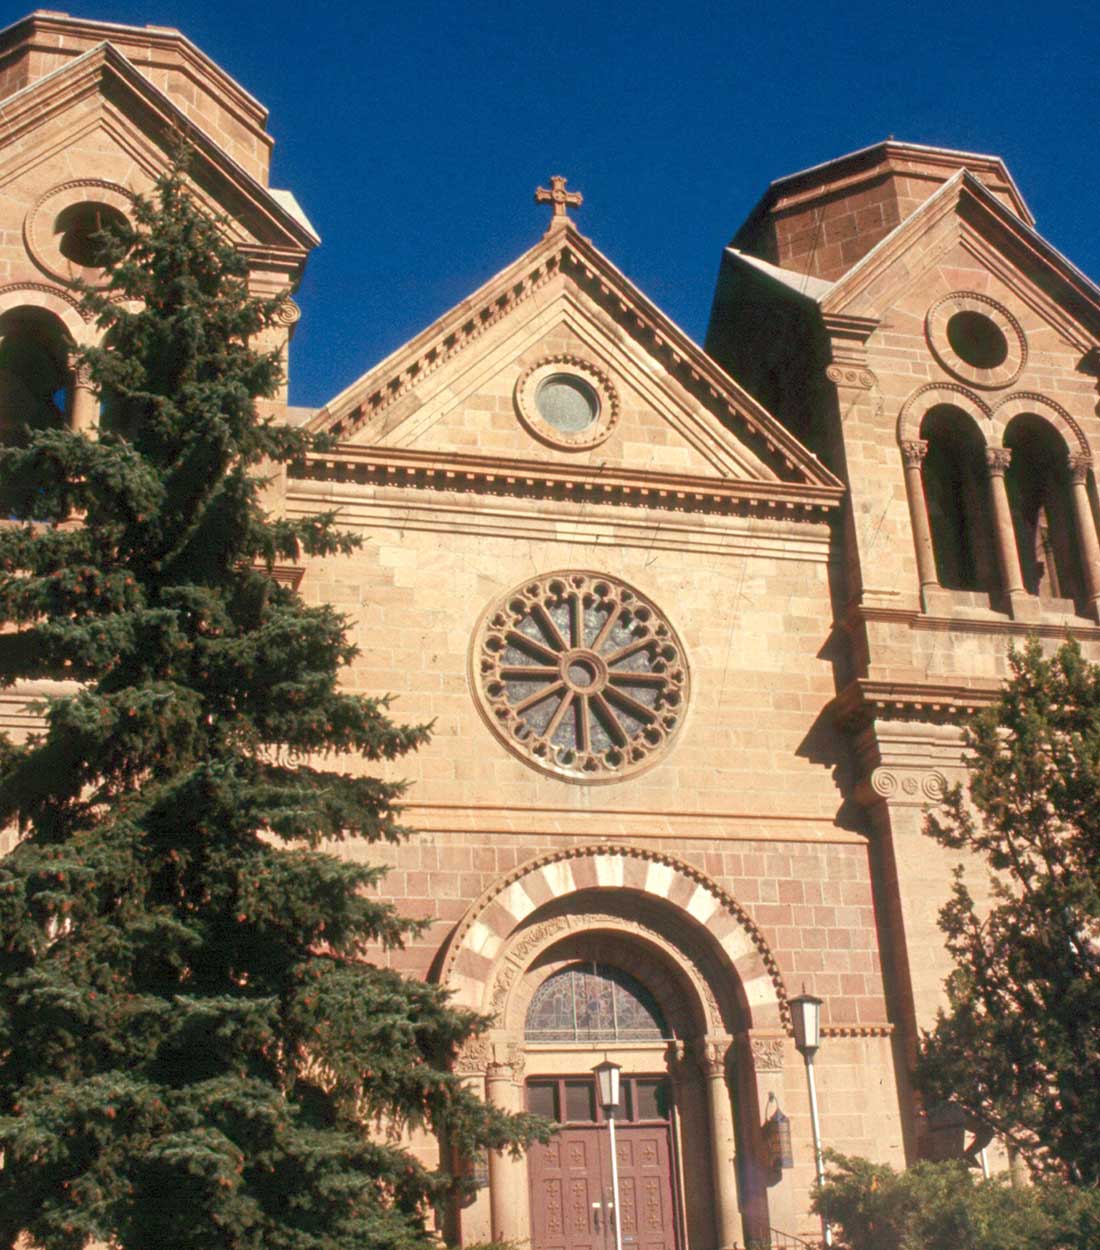 Cathedral with rose window pattern in Santa fe